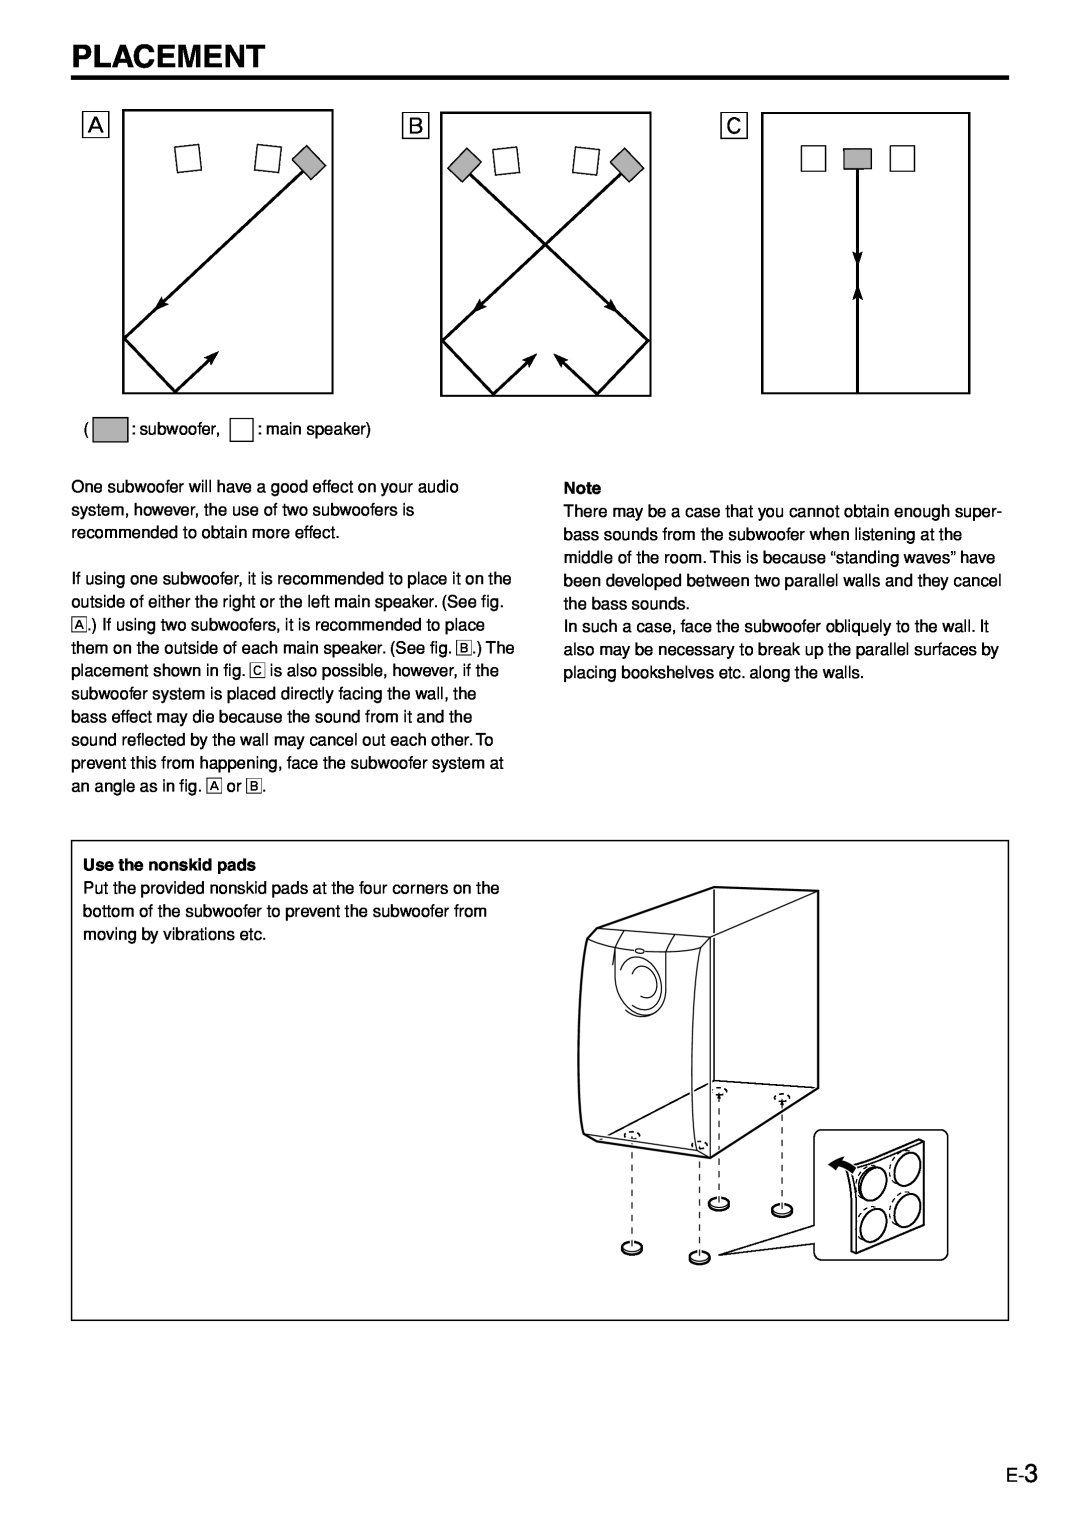 Yamaha YST-SW005 owner manual Placement, Use the nonskid pads 